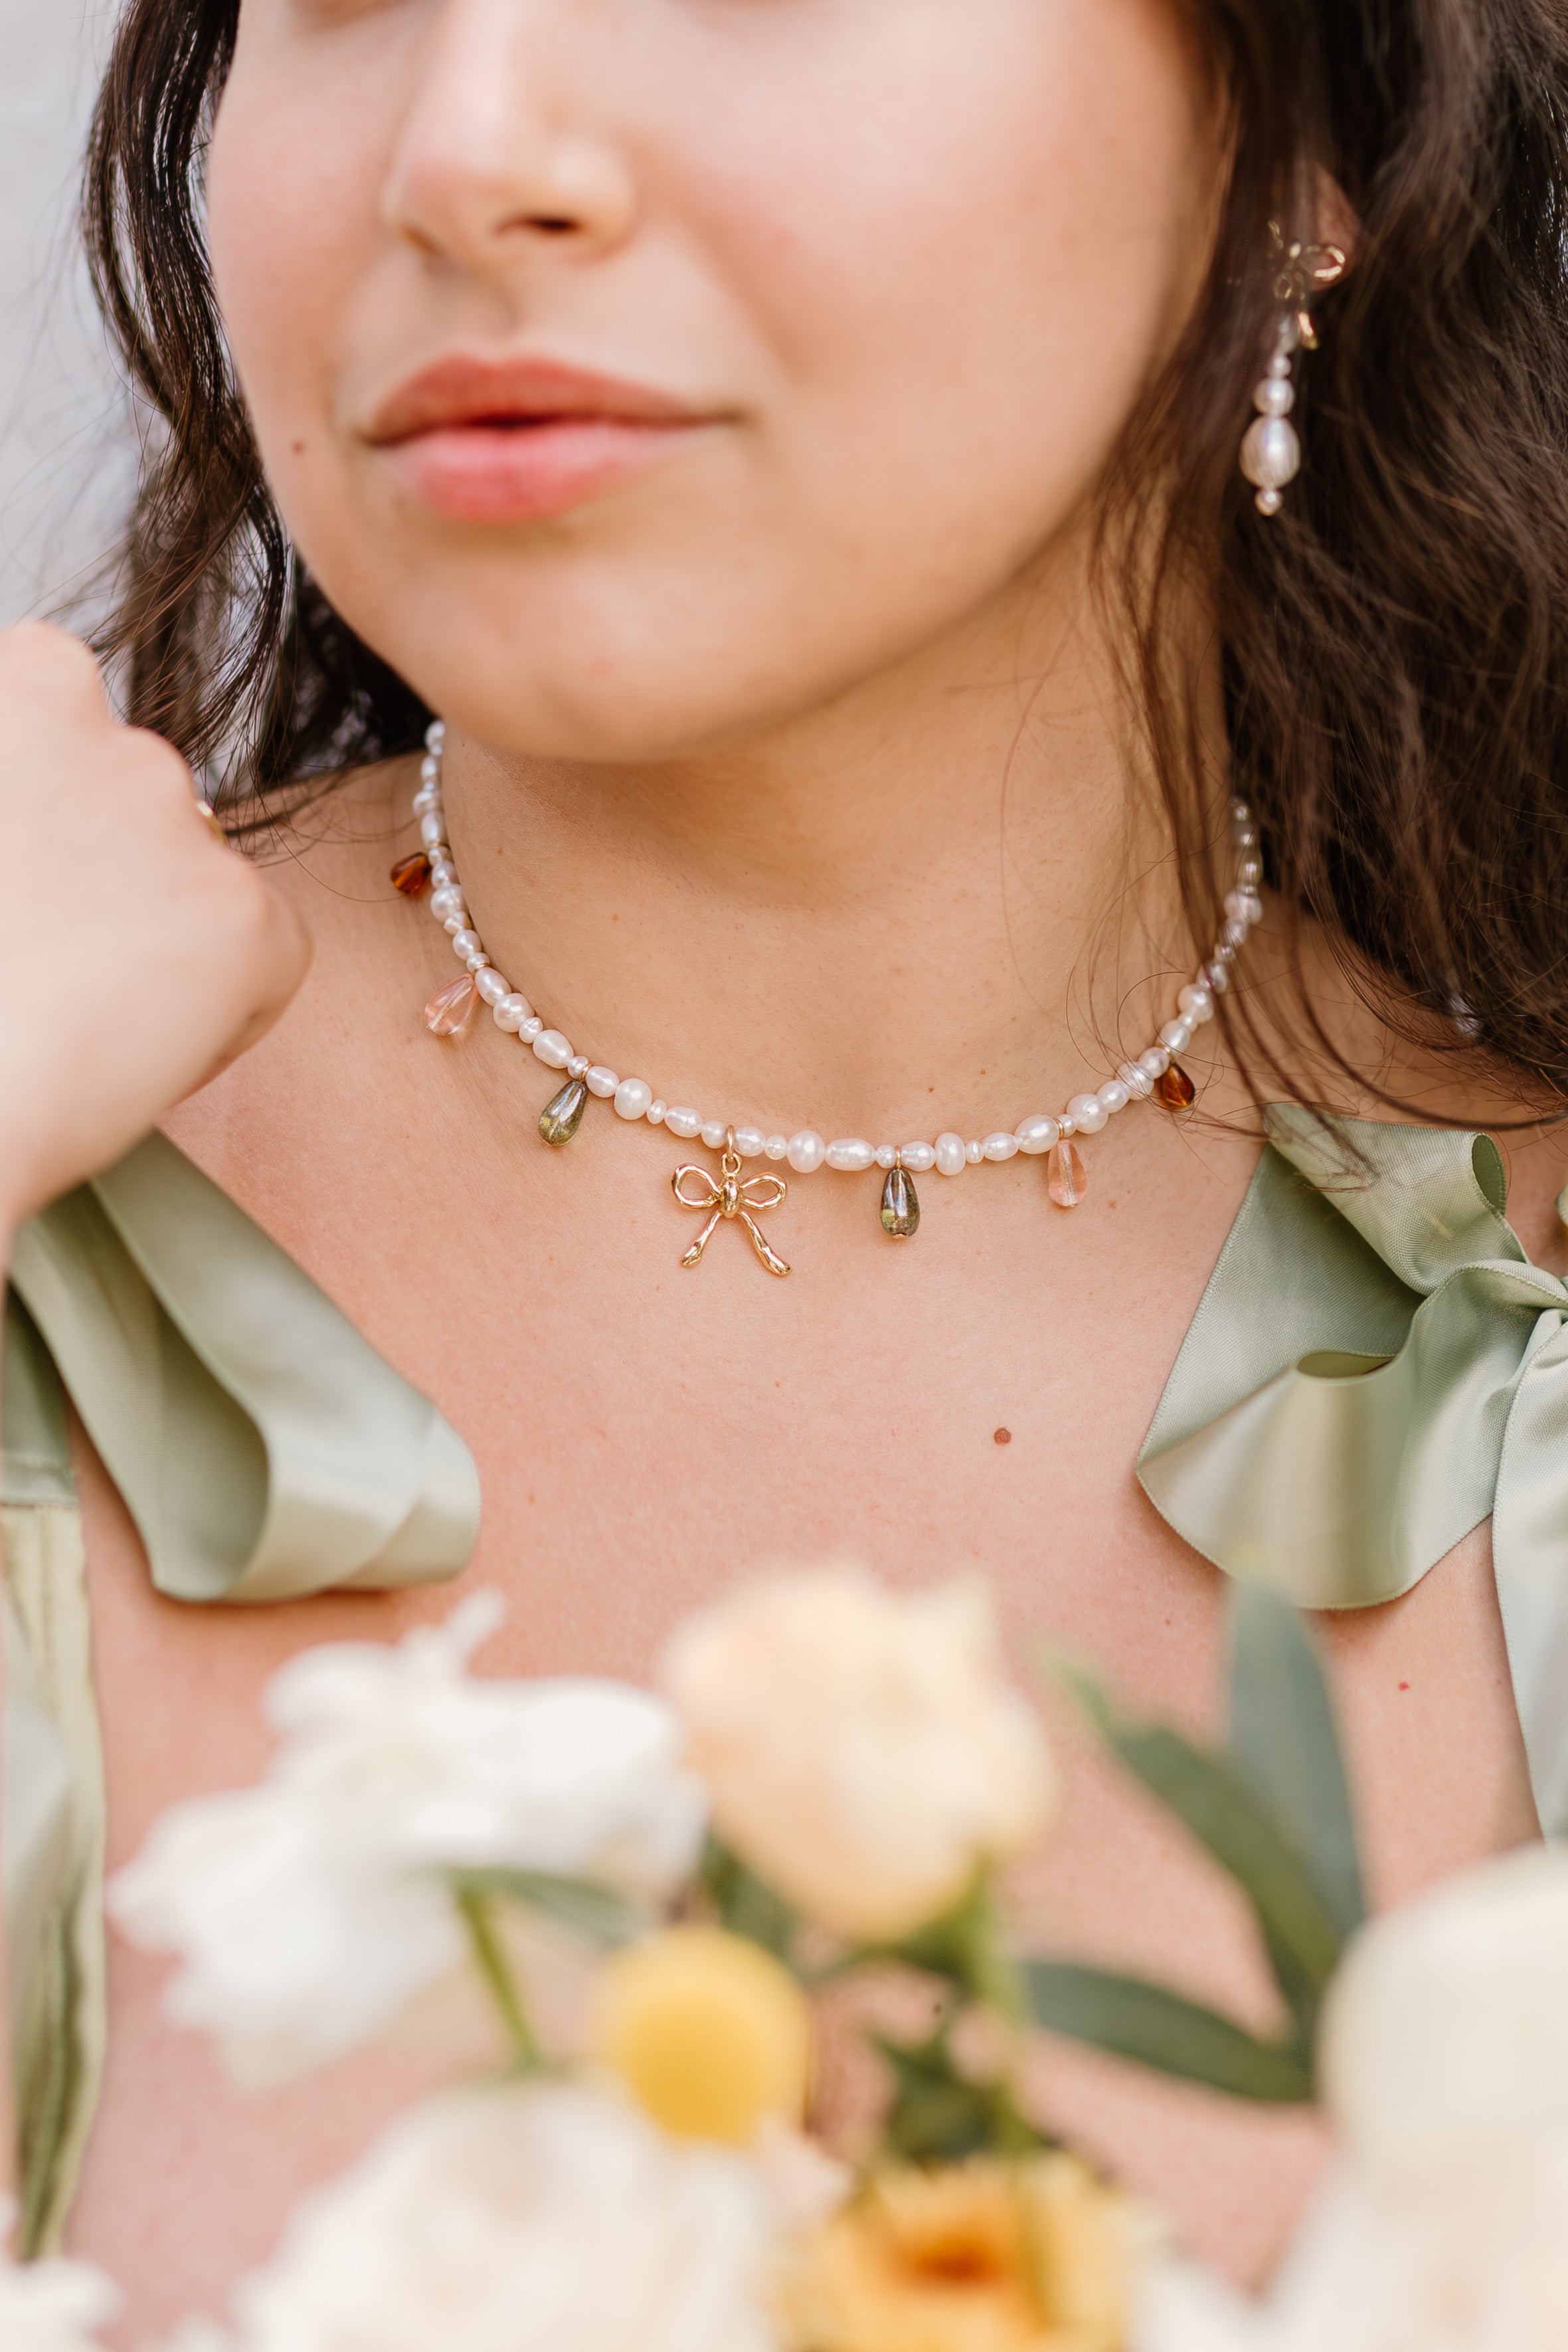 The Festoon Necklace